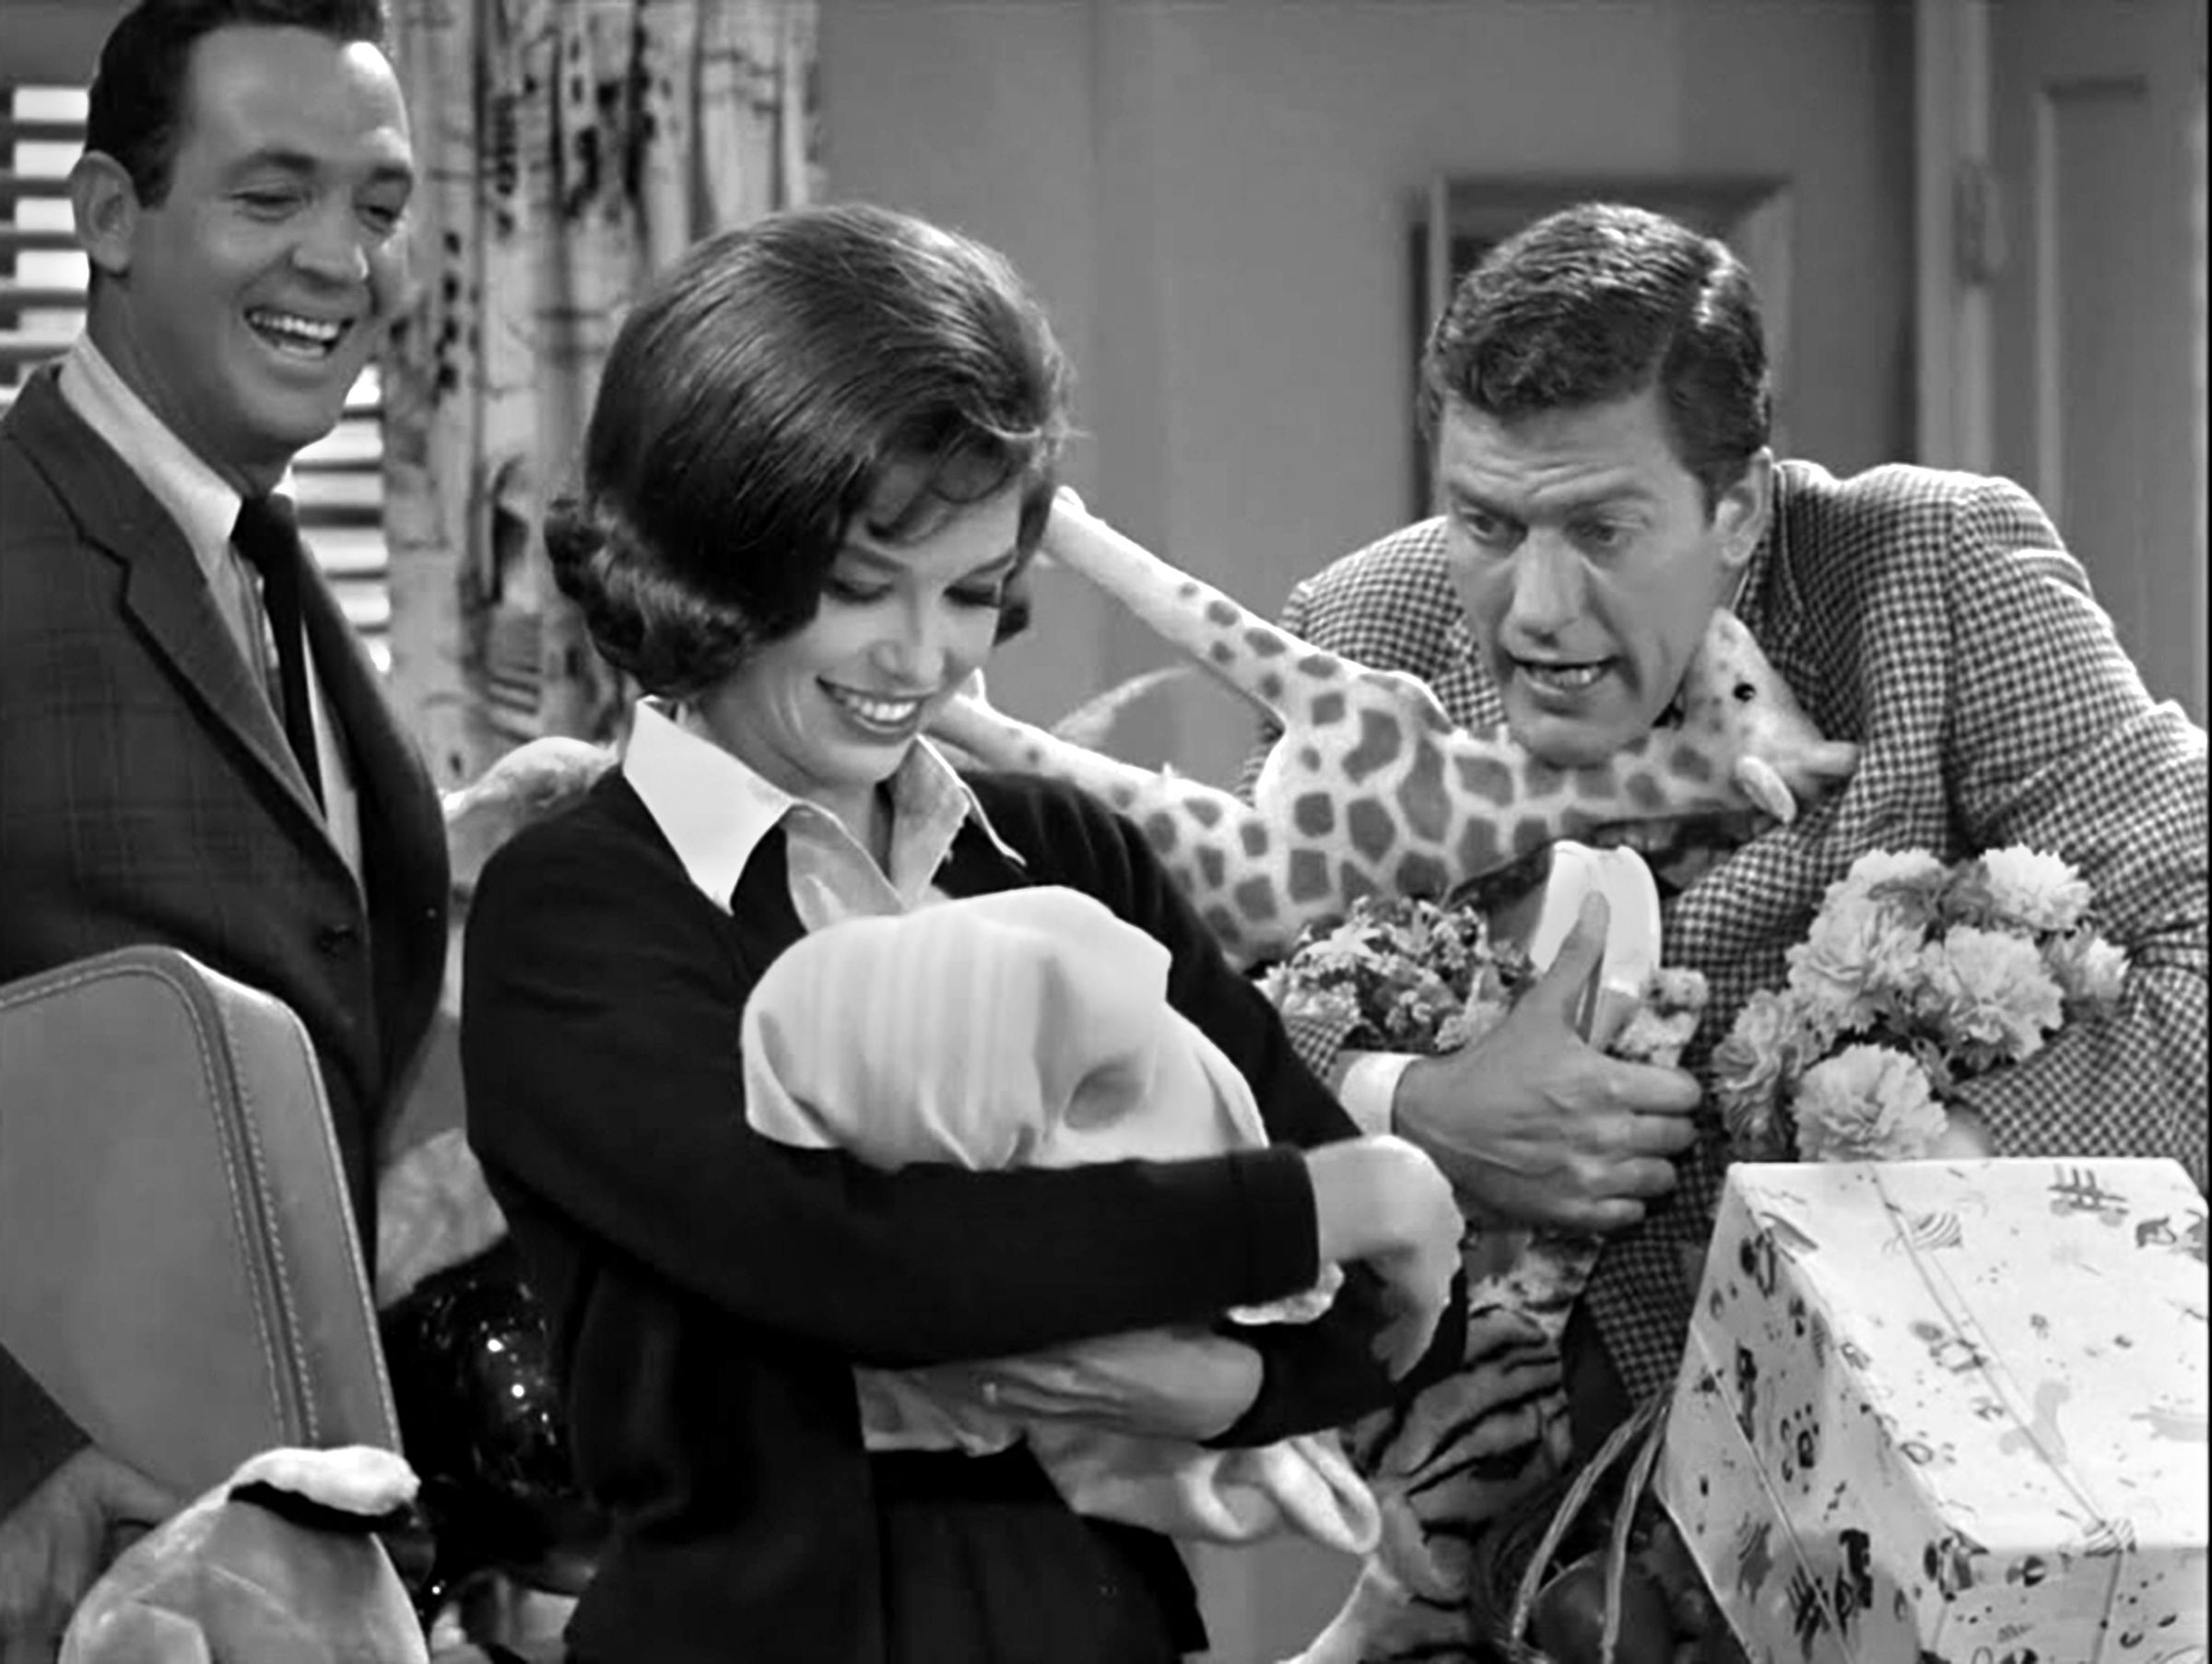 Jerry Paris, Mary Tyler Moore, and Dick Van Dyke on "The Dick Van Dyke Show" in Los Angeles on September 25, 1963. | Source: CBS/Getty Images